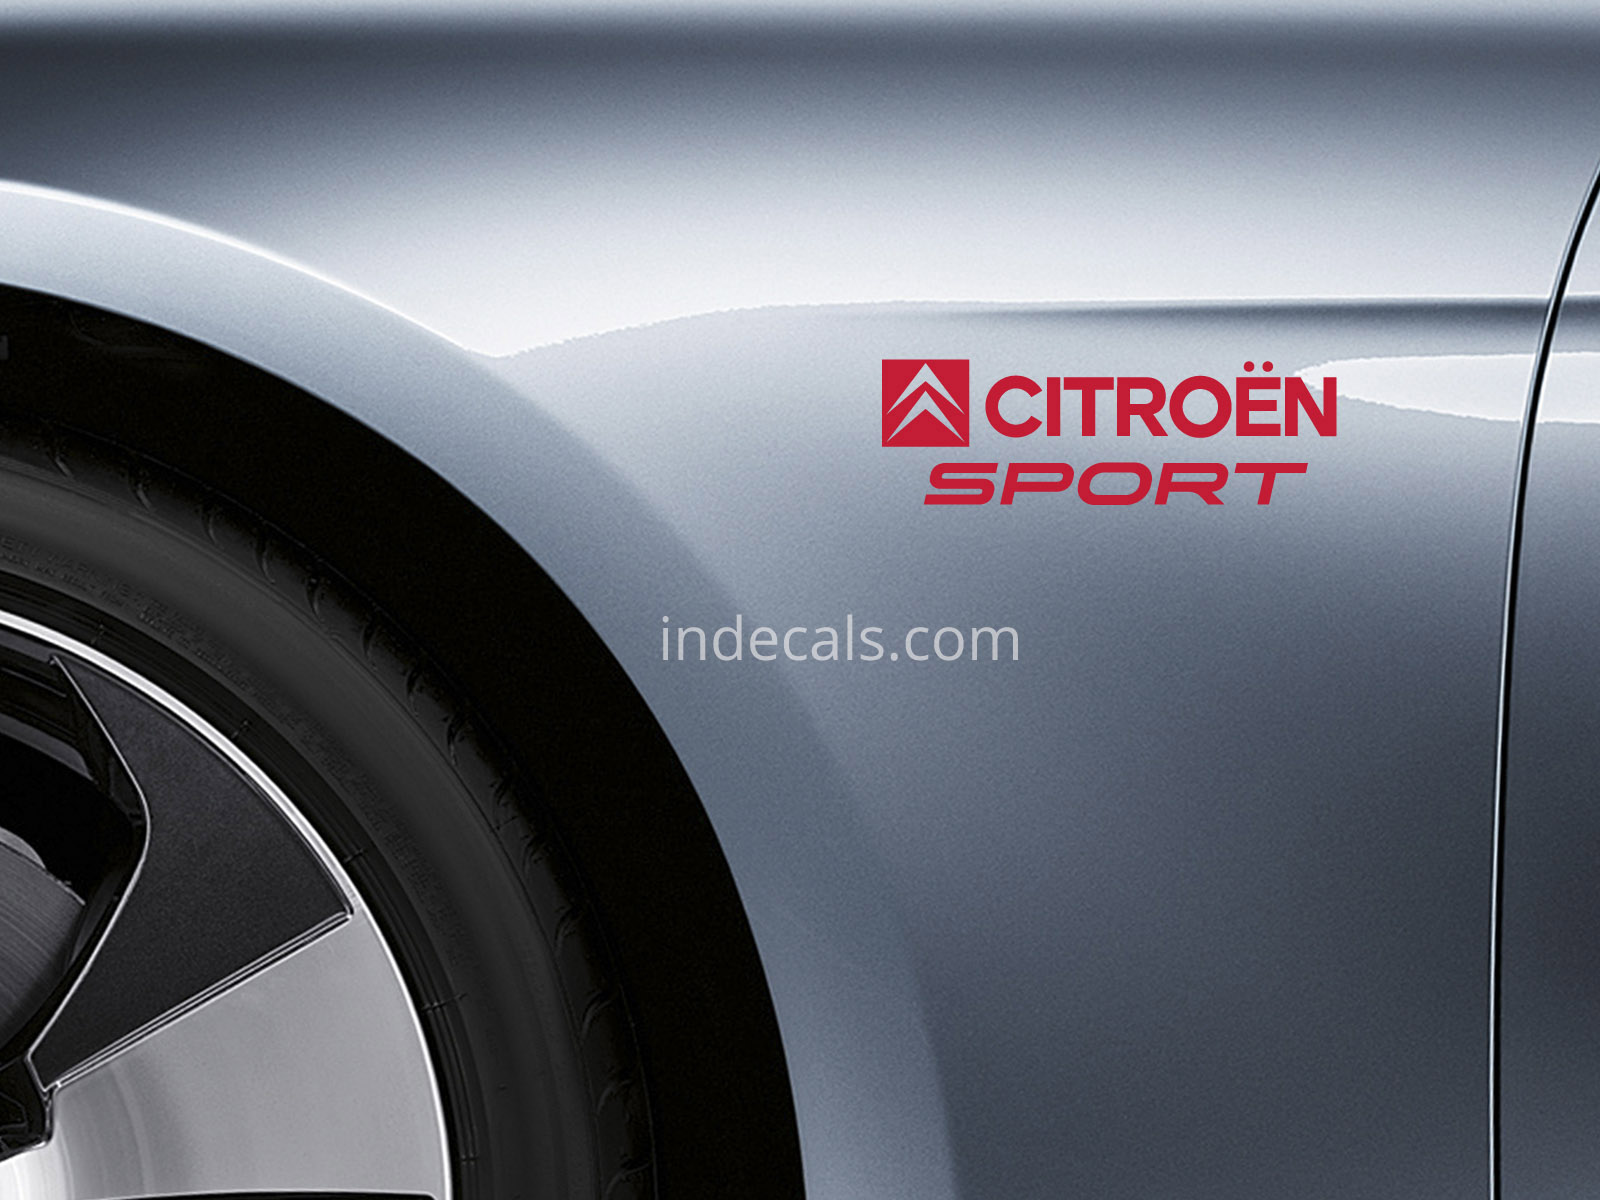 2 x Citroen Sports stickers for Wings - Red